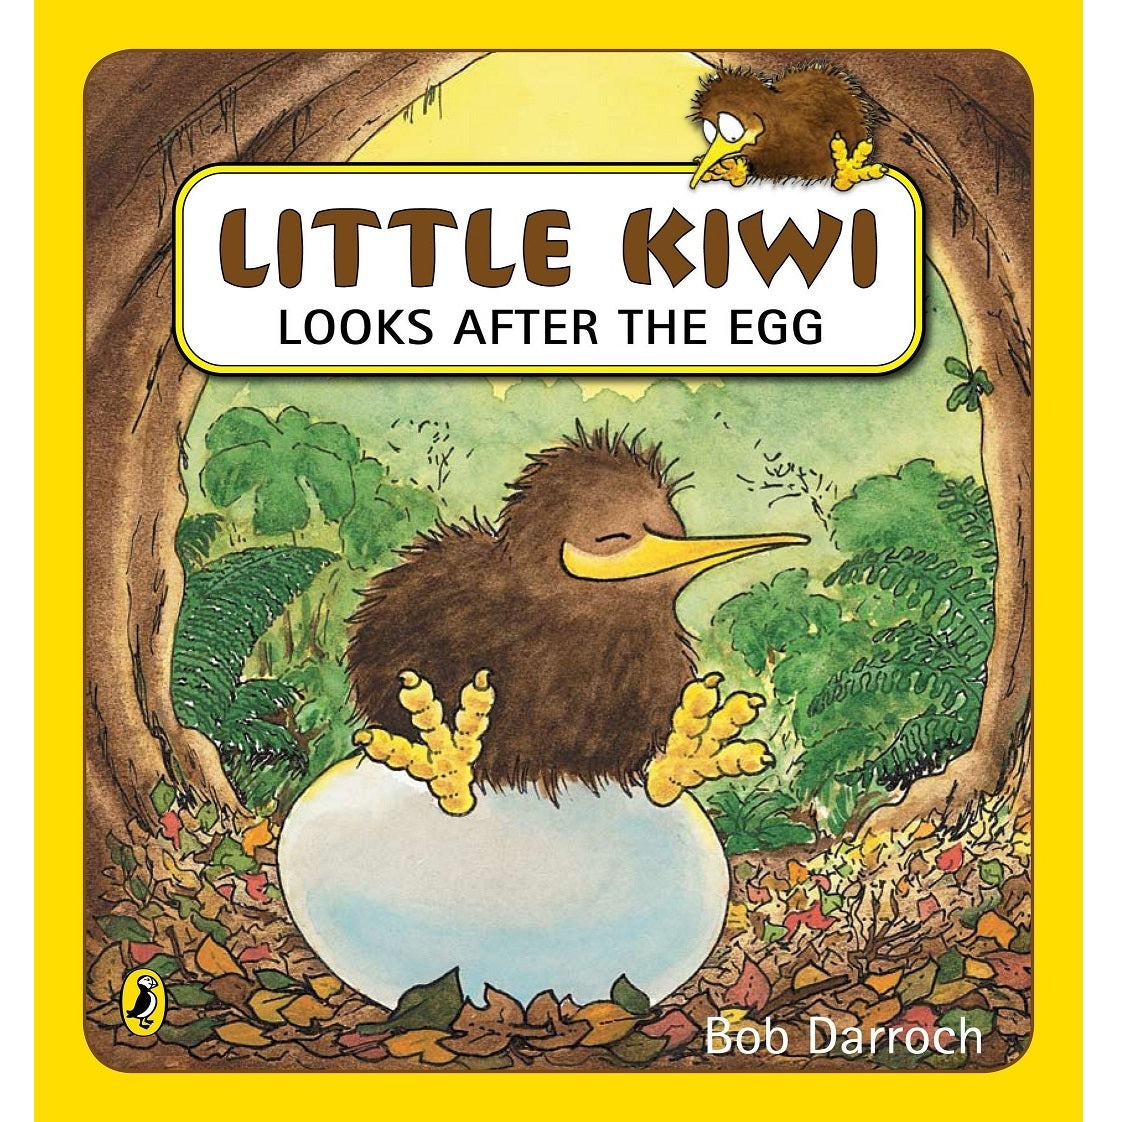 Little Kiwi Looks After the Egg